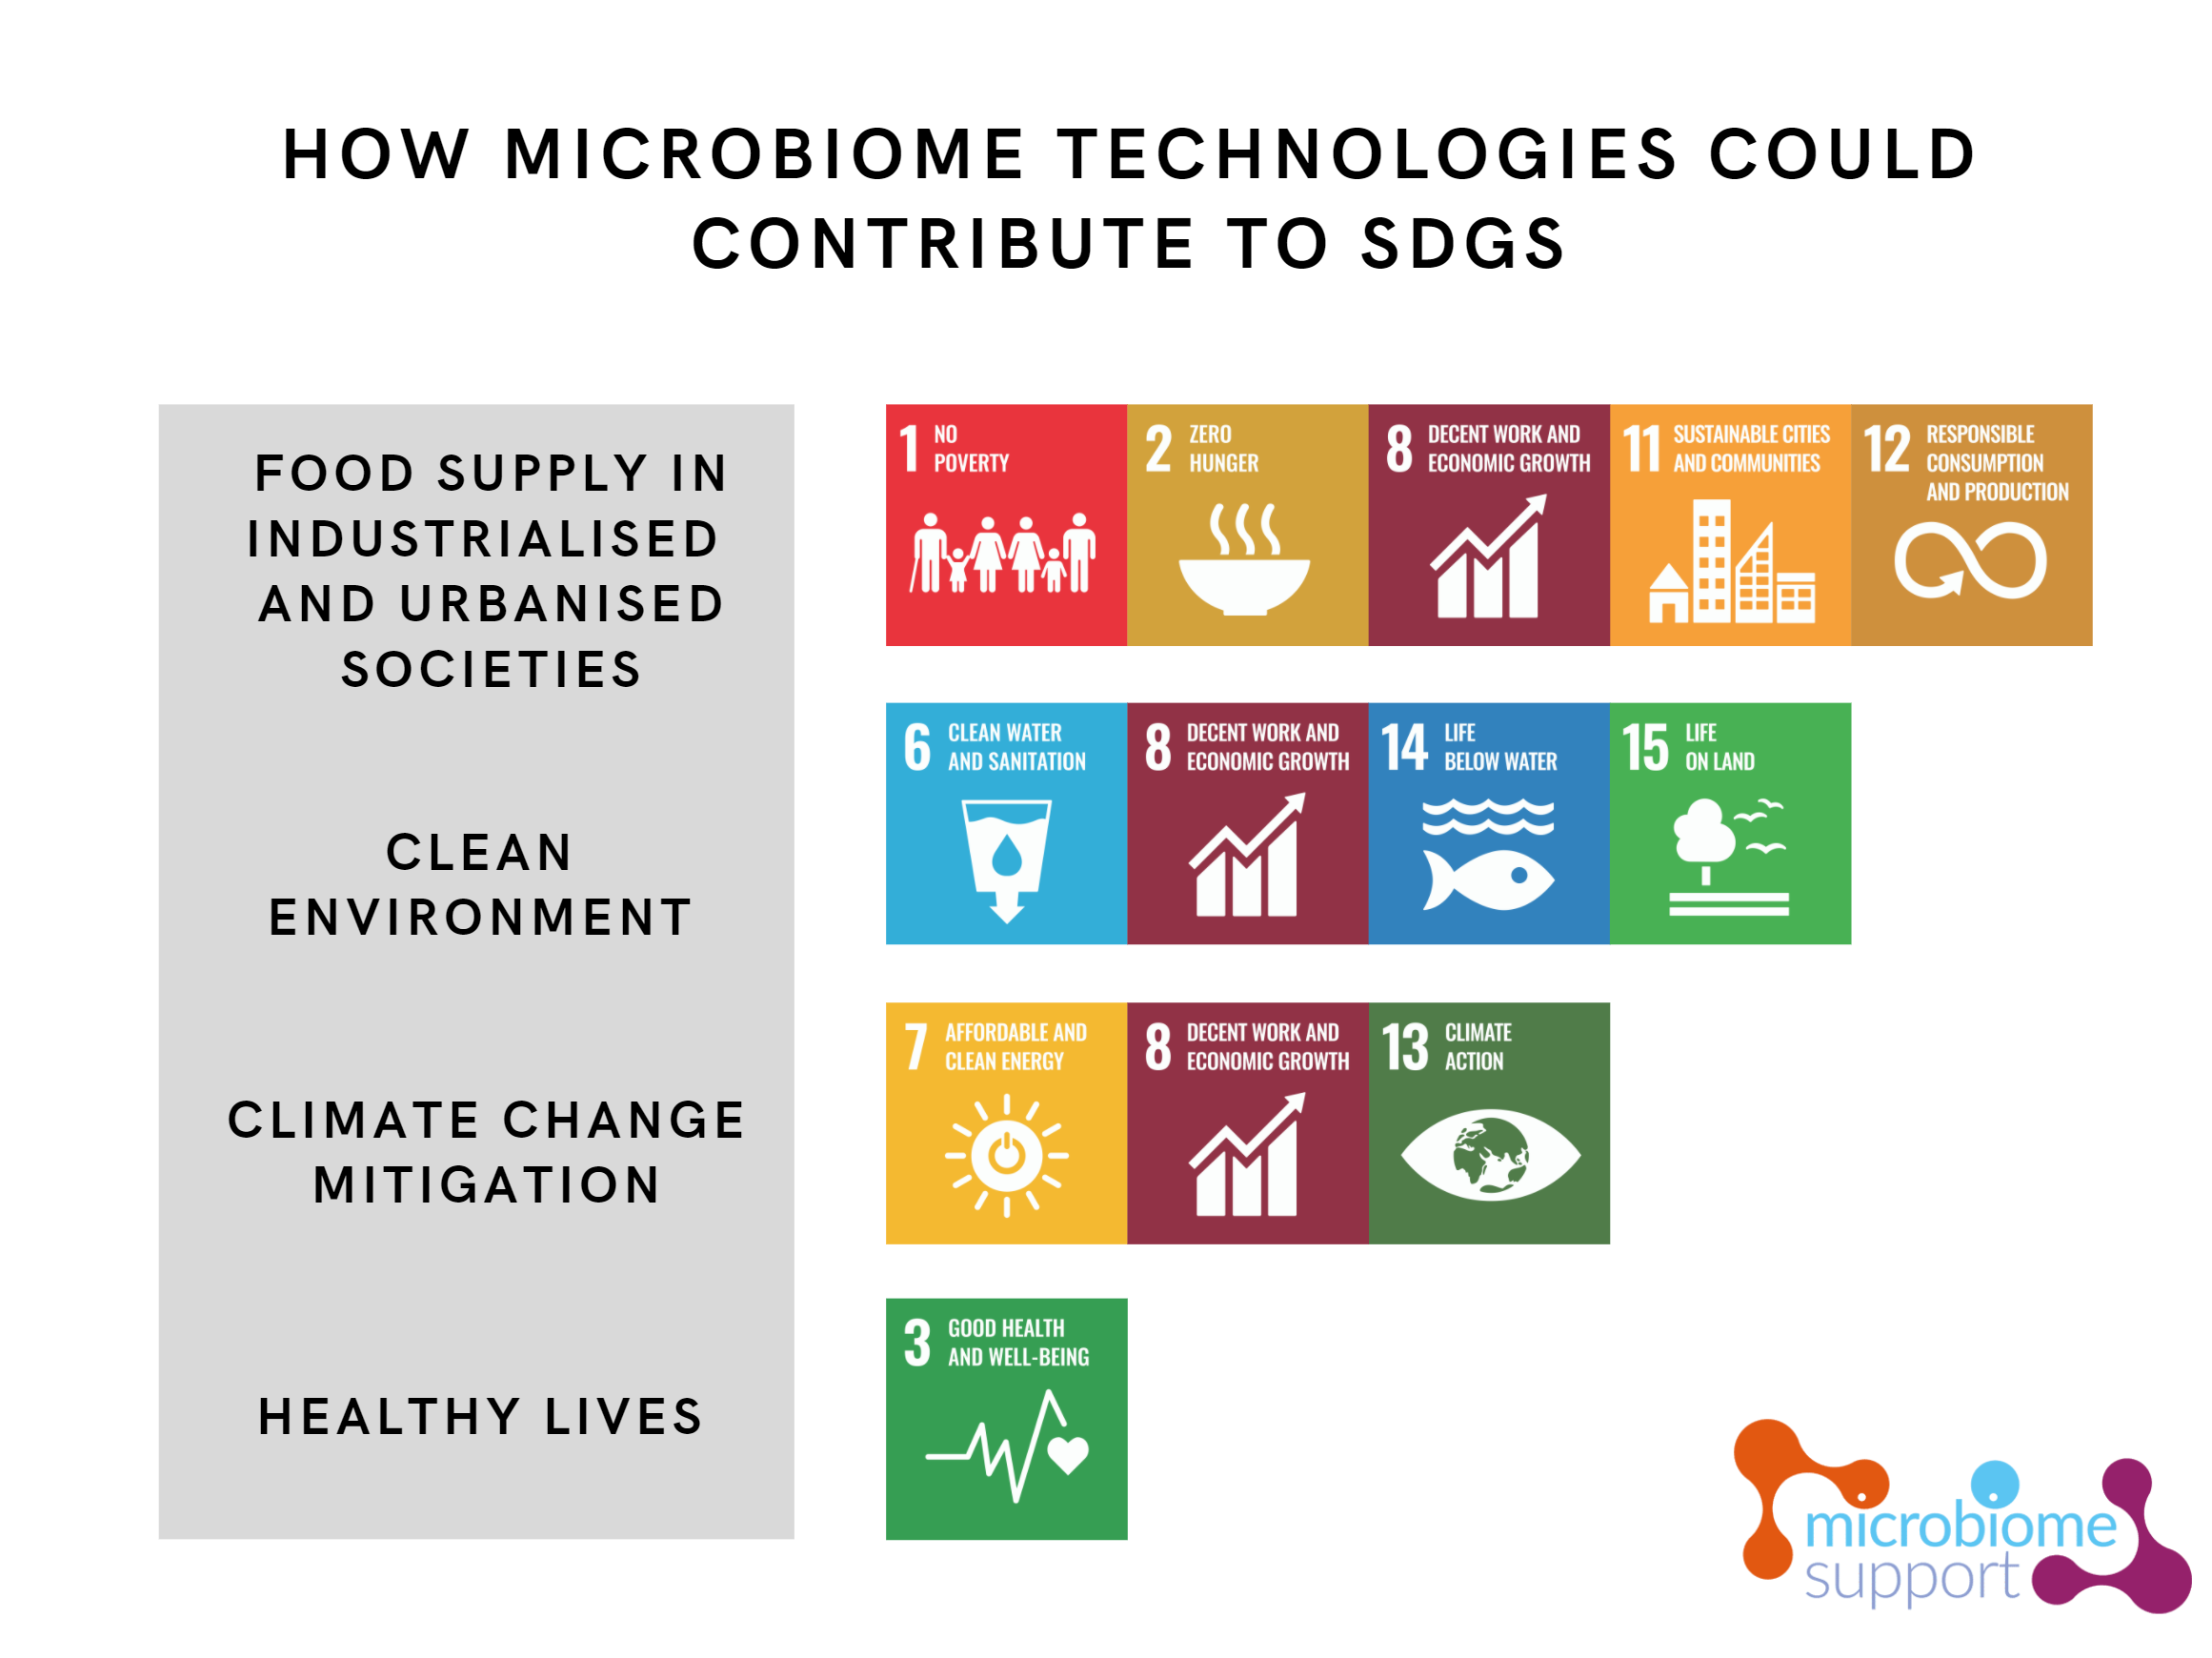 A sustainable future through microbiome innovations MicrobiomeSupport